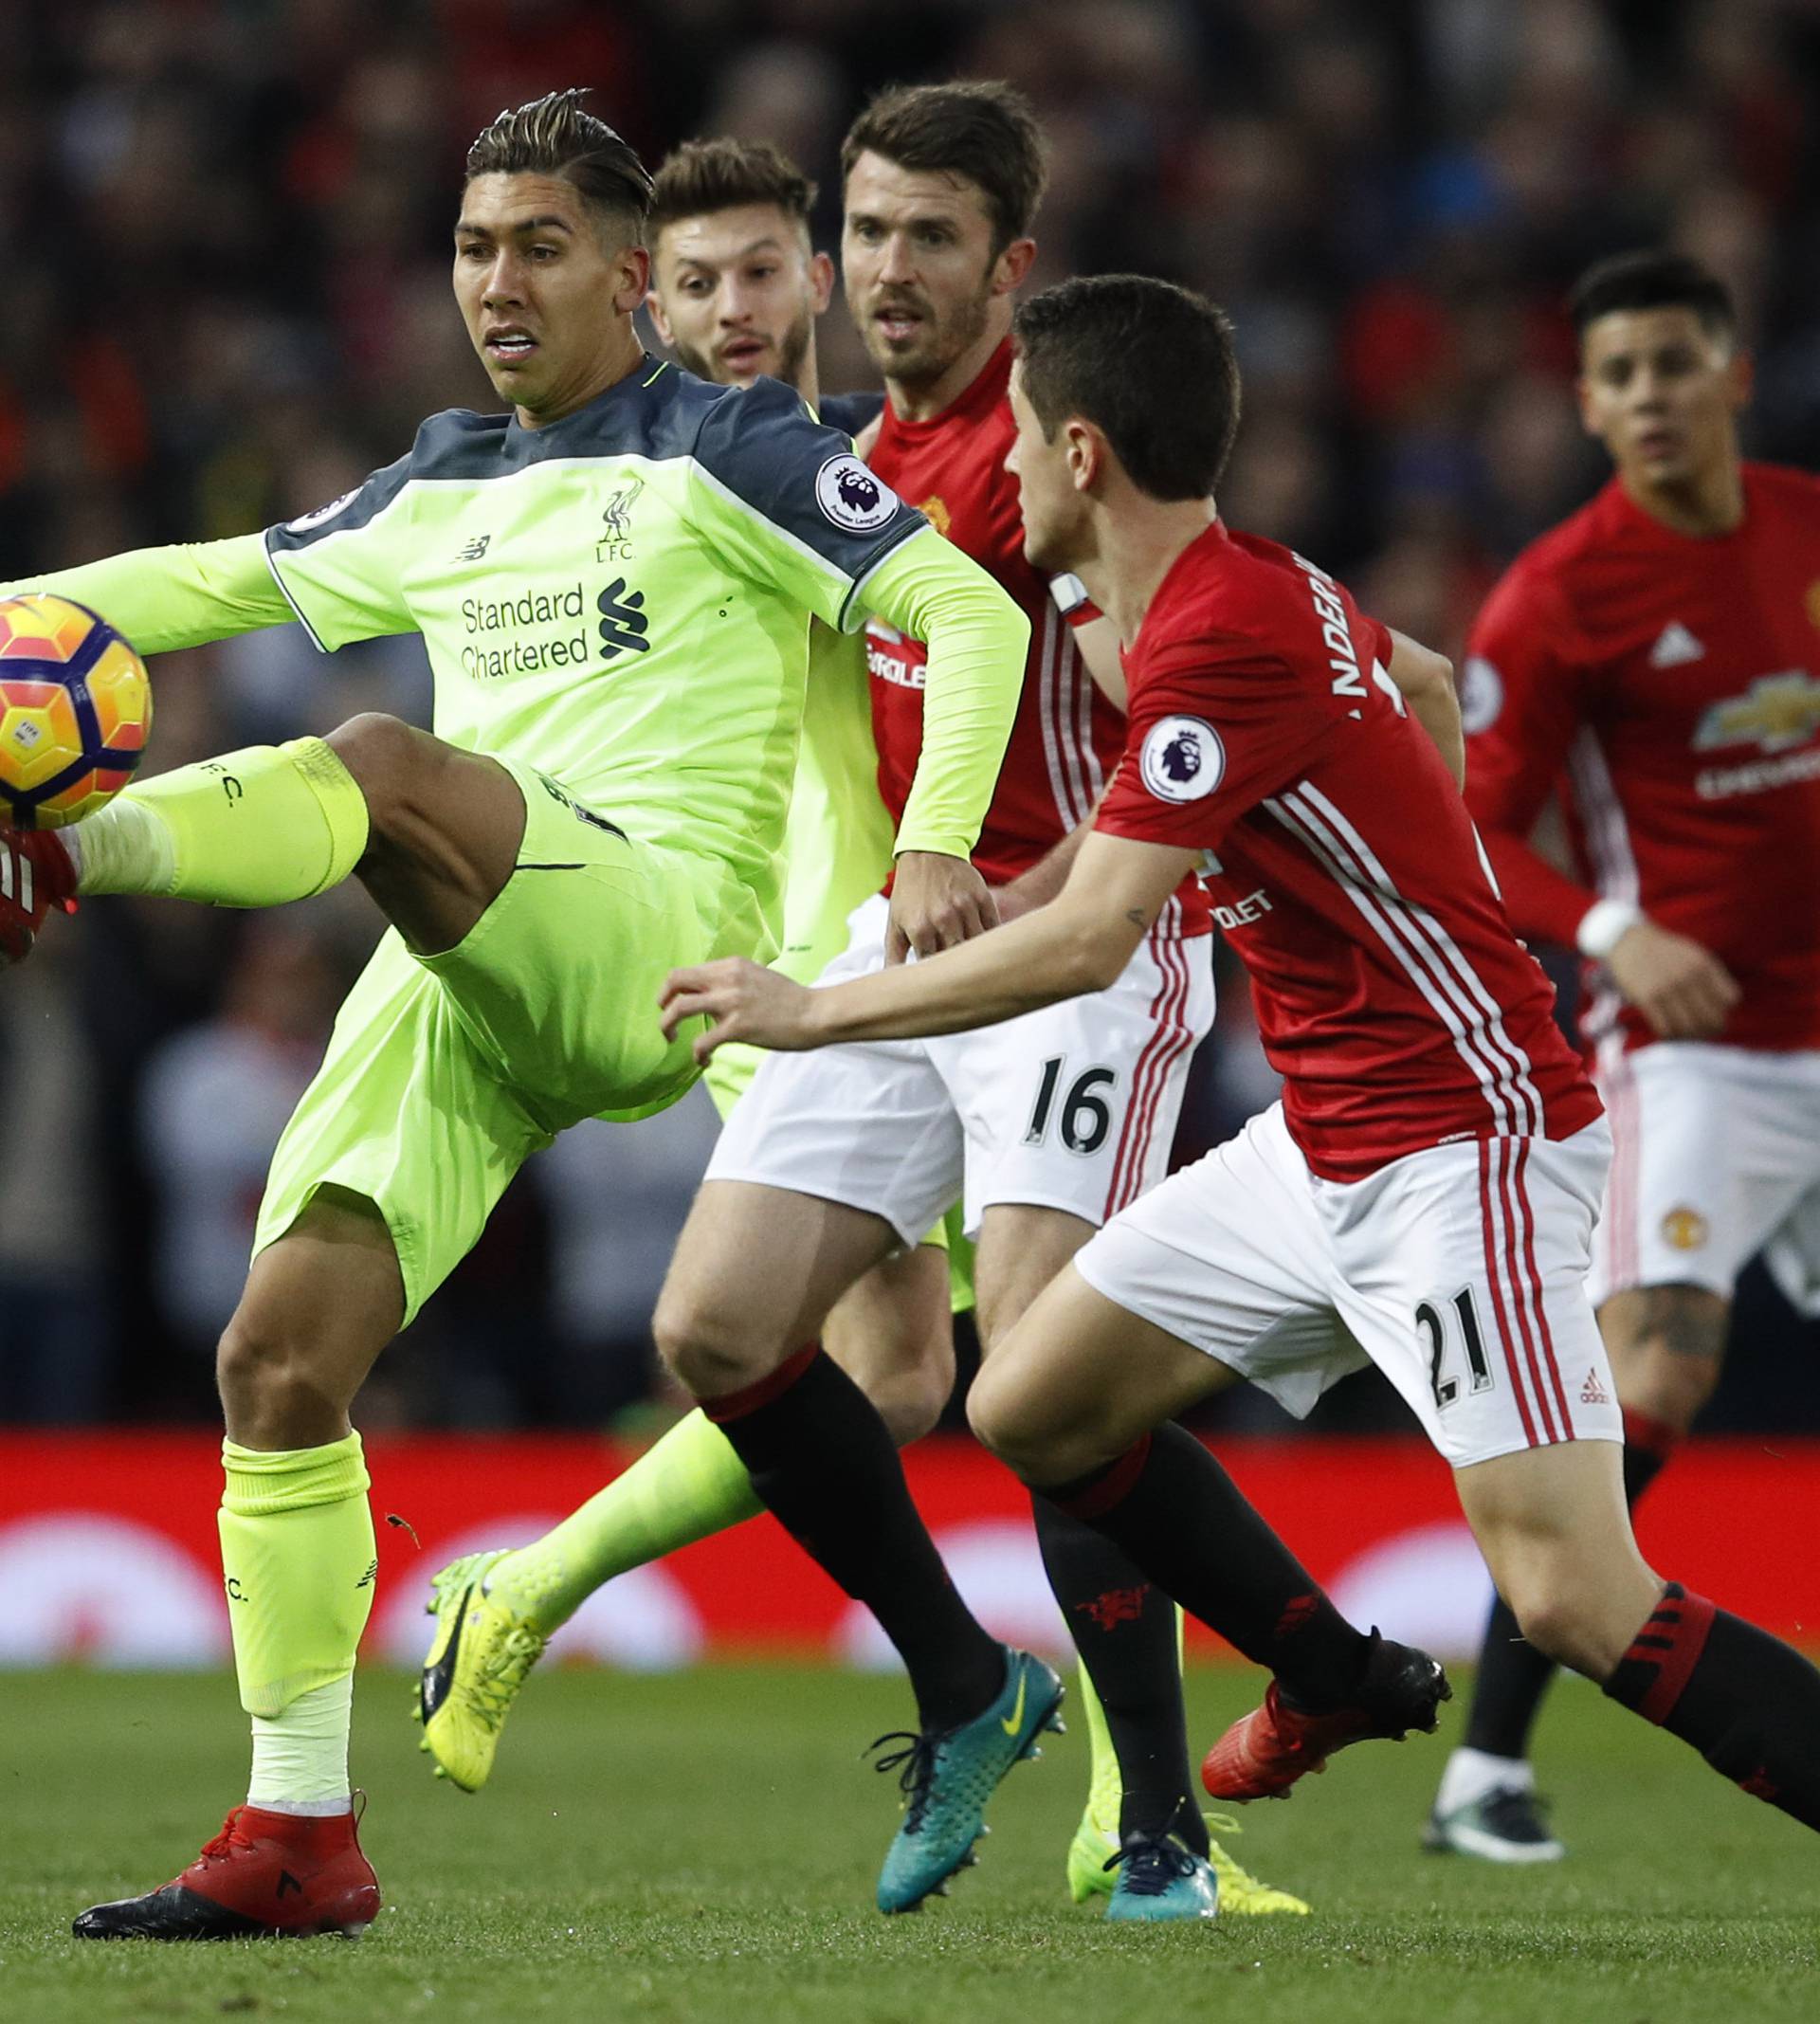 Liverpool's Roberto Firmino in action with Manchester United's Ander Herrera